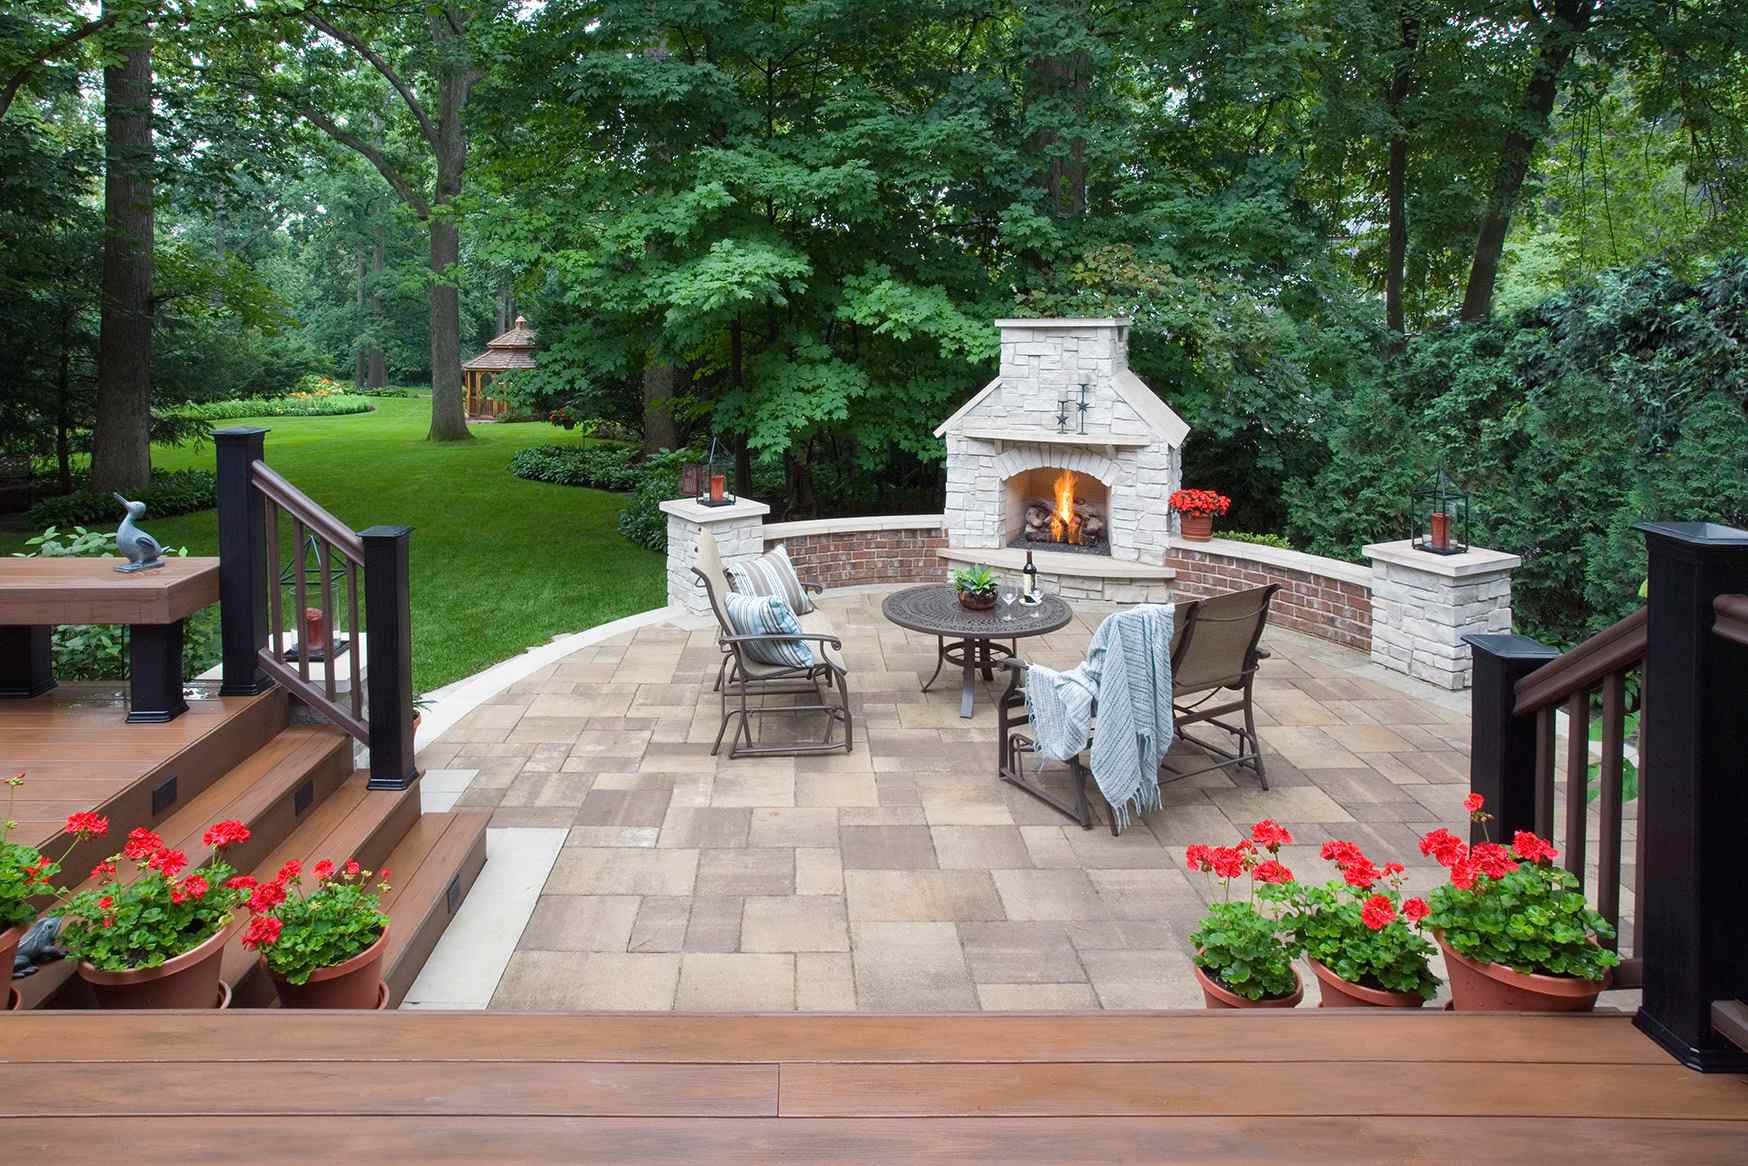 Downers Grove landscaping services